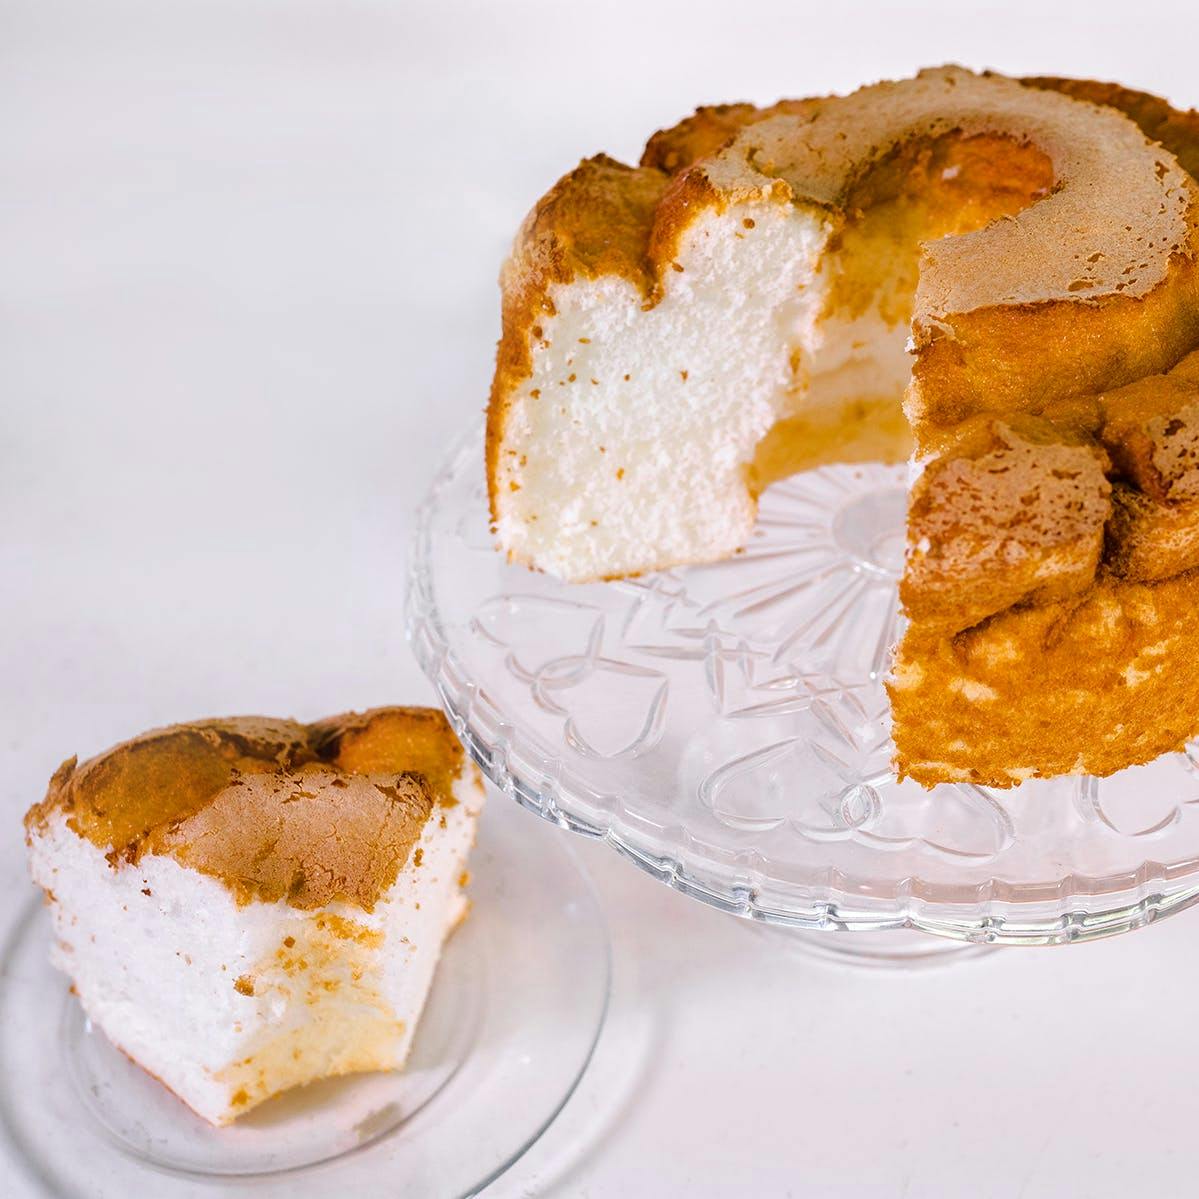 Get the most recent Angel Food Cake Wax Melt Angel Food Cake at great prices